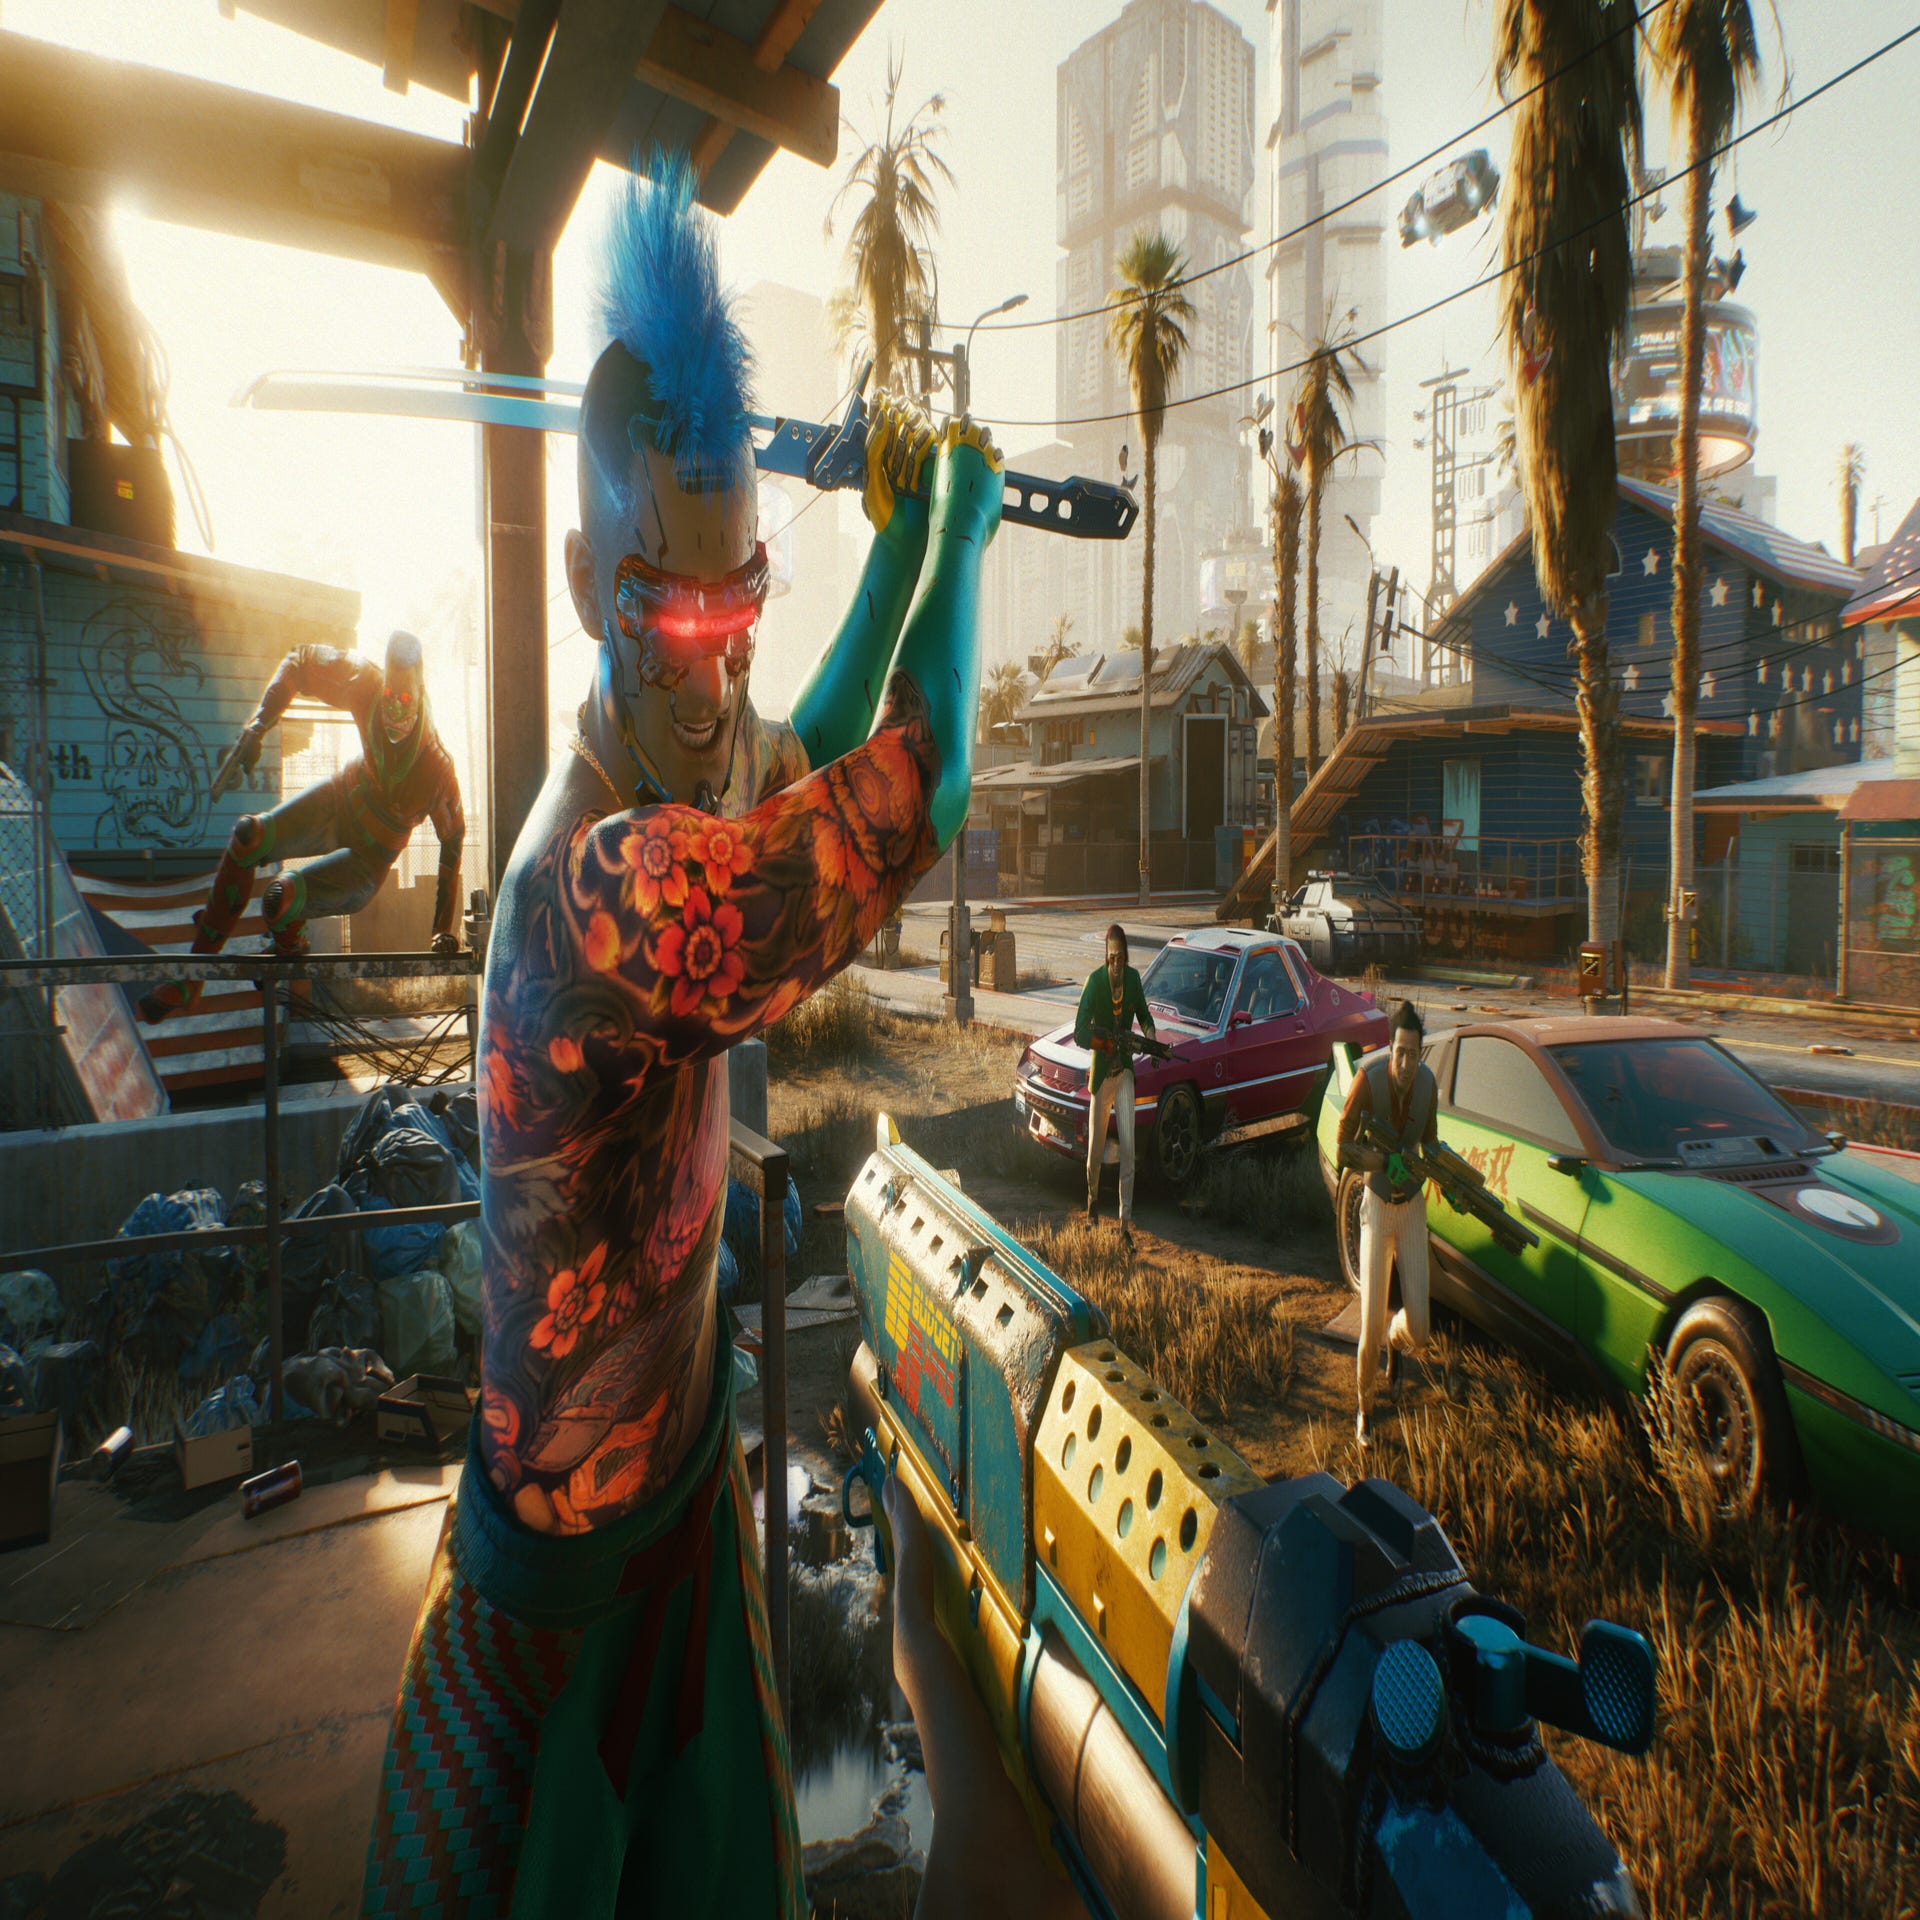 Still haven't gotten round to Cyberpunk 2077? You can try it out for free very soon, but not for long